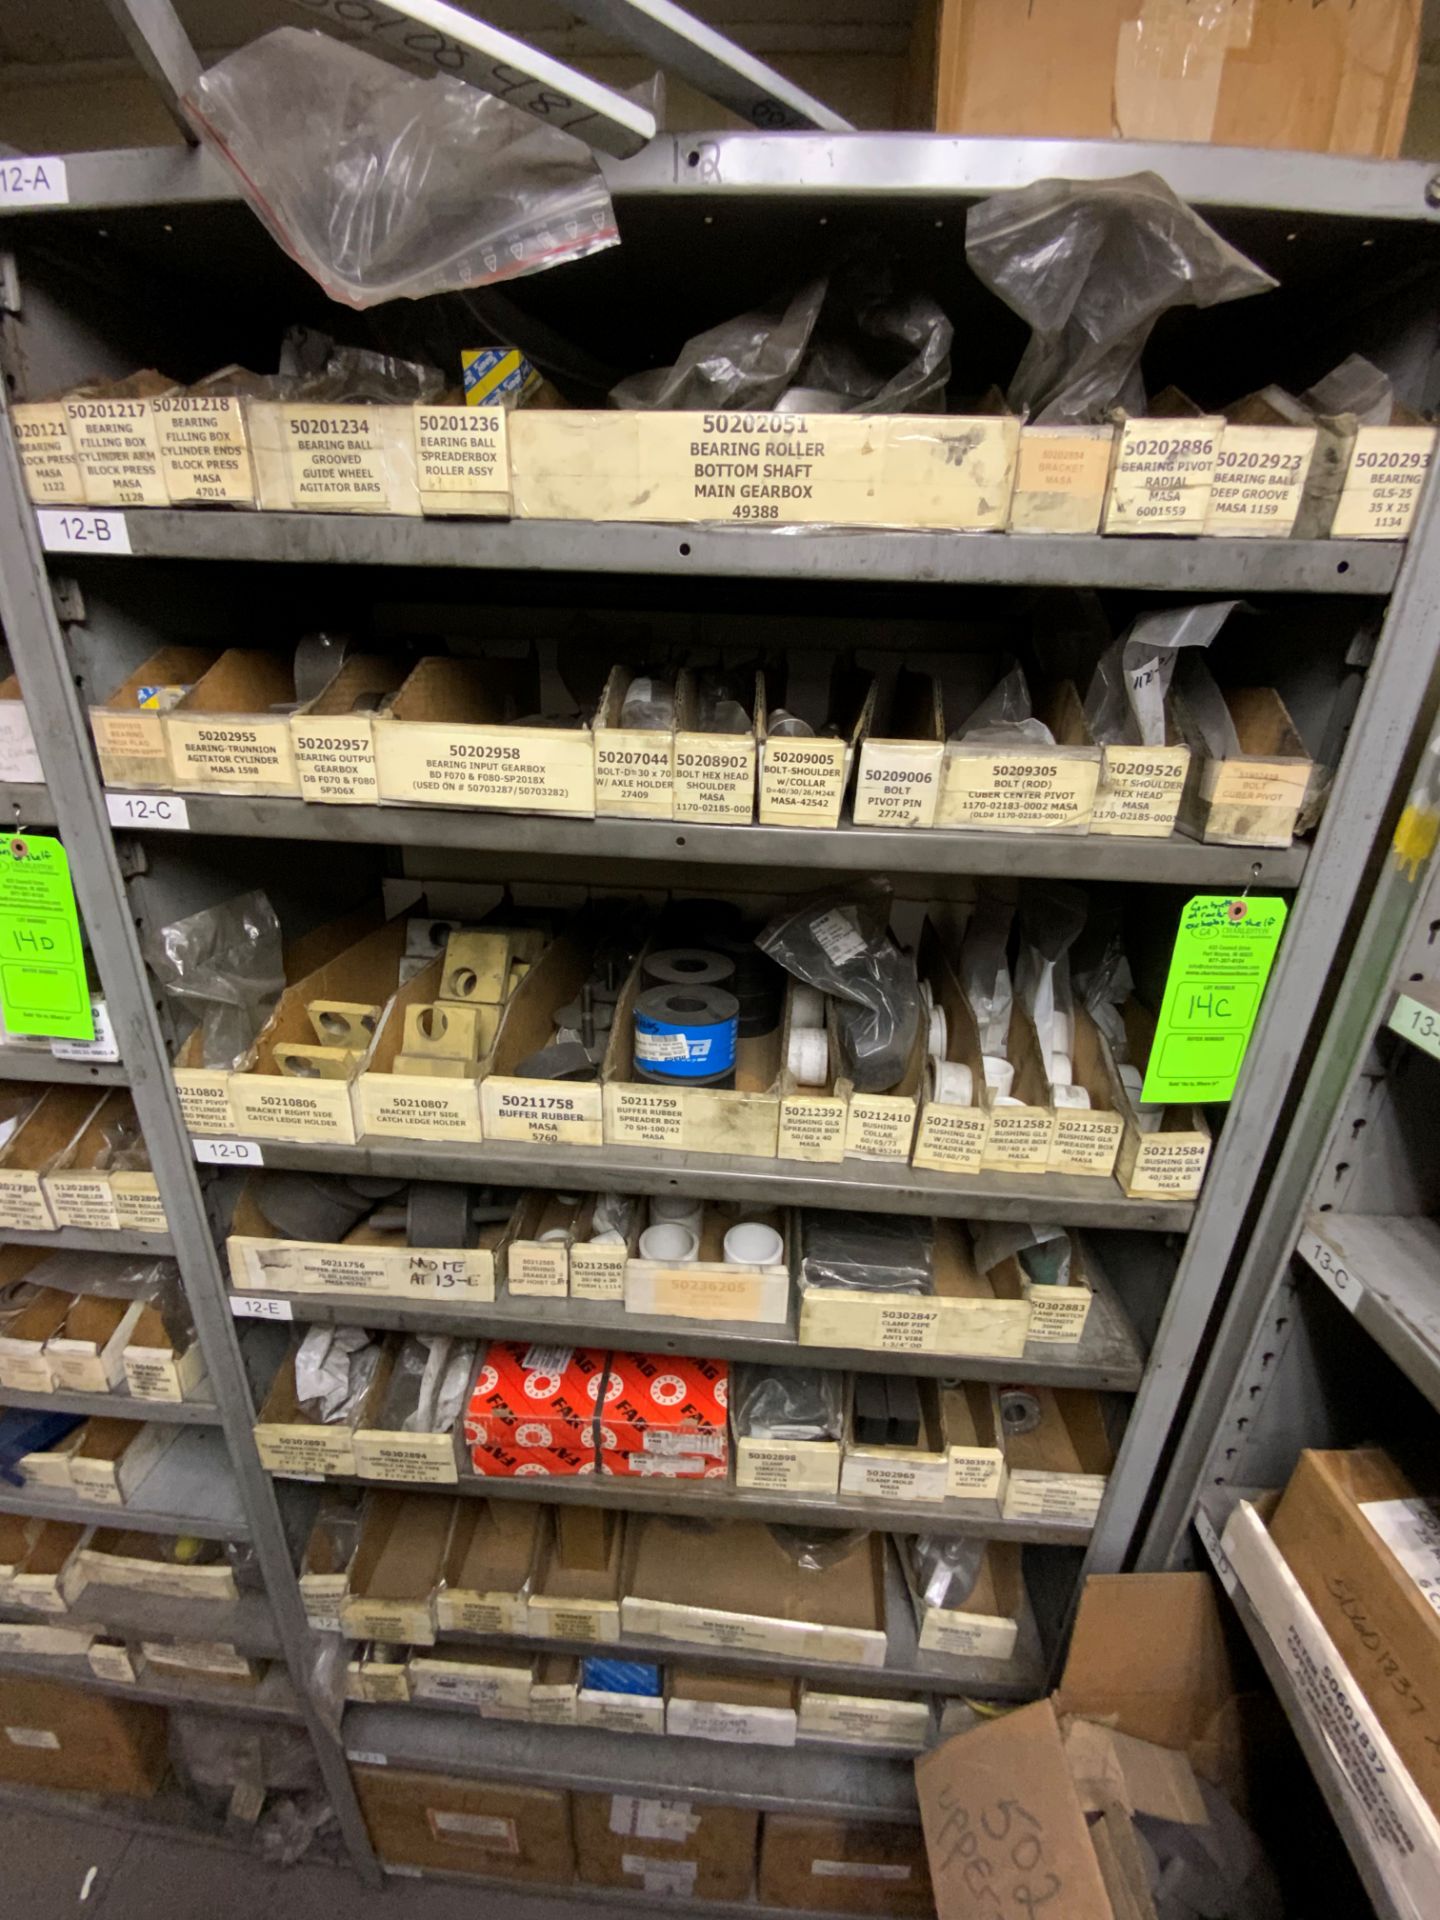 CONTENTS OF RACK (EXCLUDING TOP SHELF): MASA SPARE BEARINGS; BUSHINGS; GEARBOXES; ETC. - SEE - Image 2 of 3